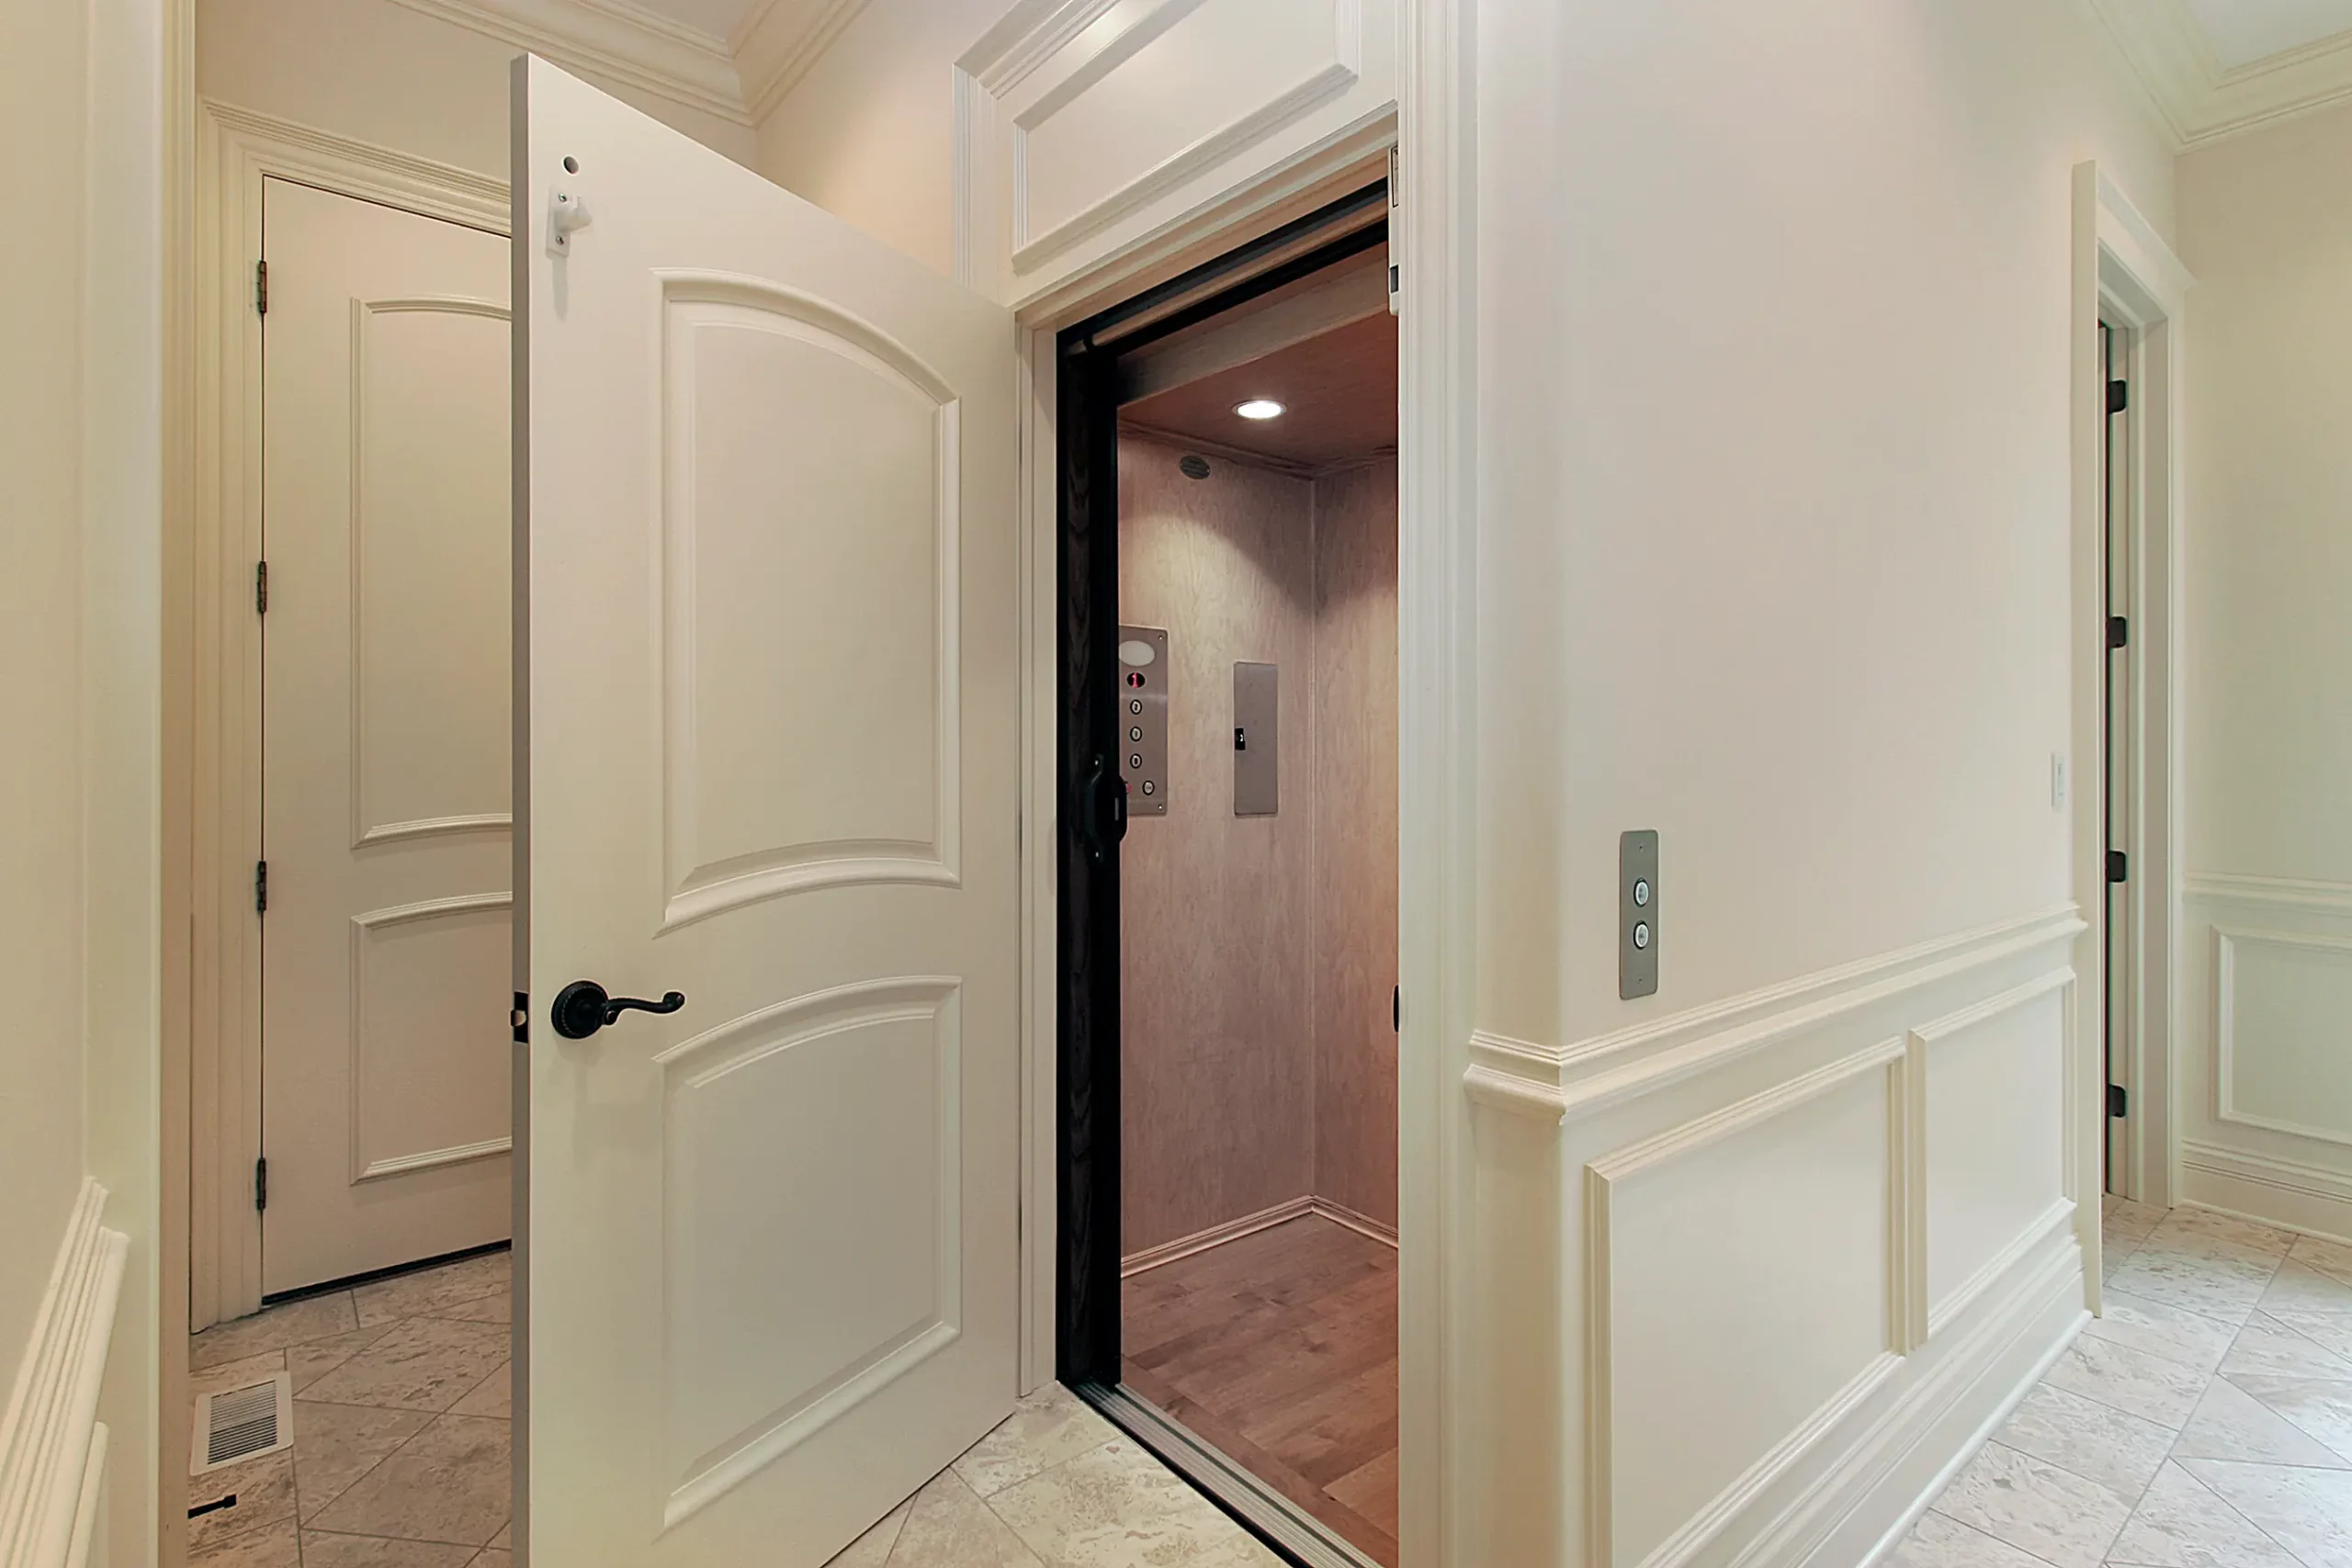 How Much Do Residential Elevators Cost